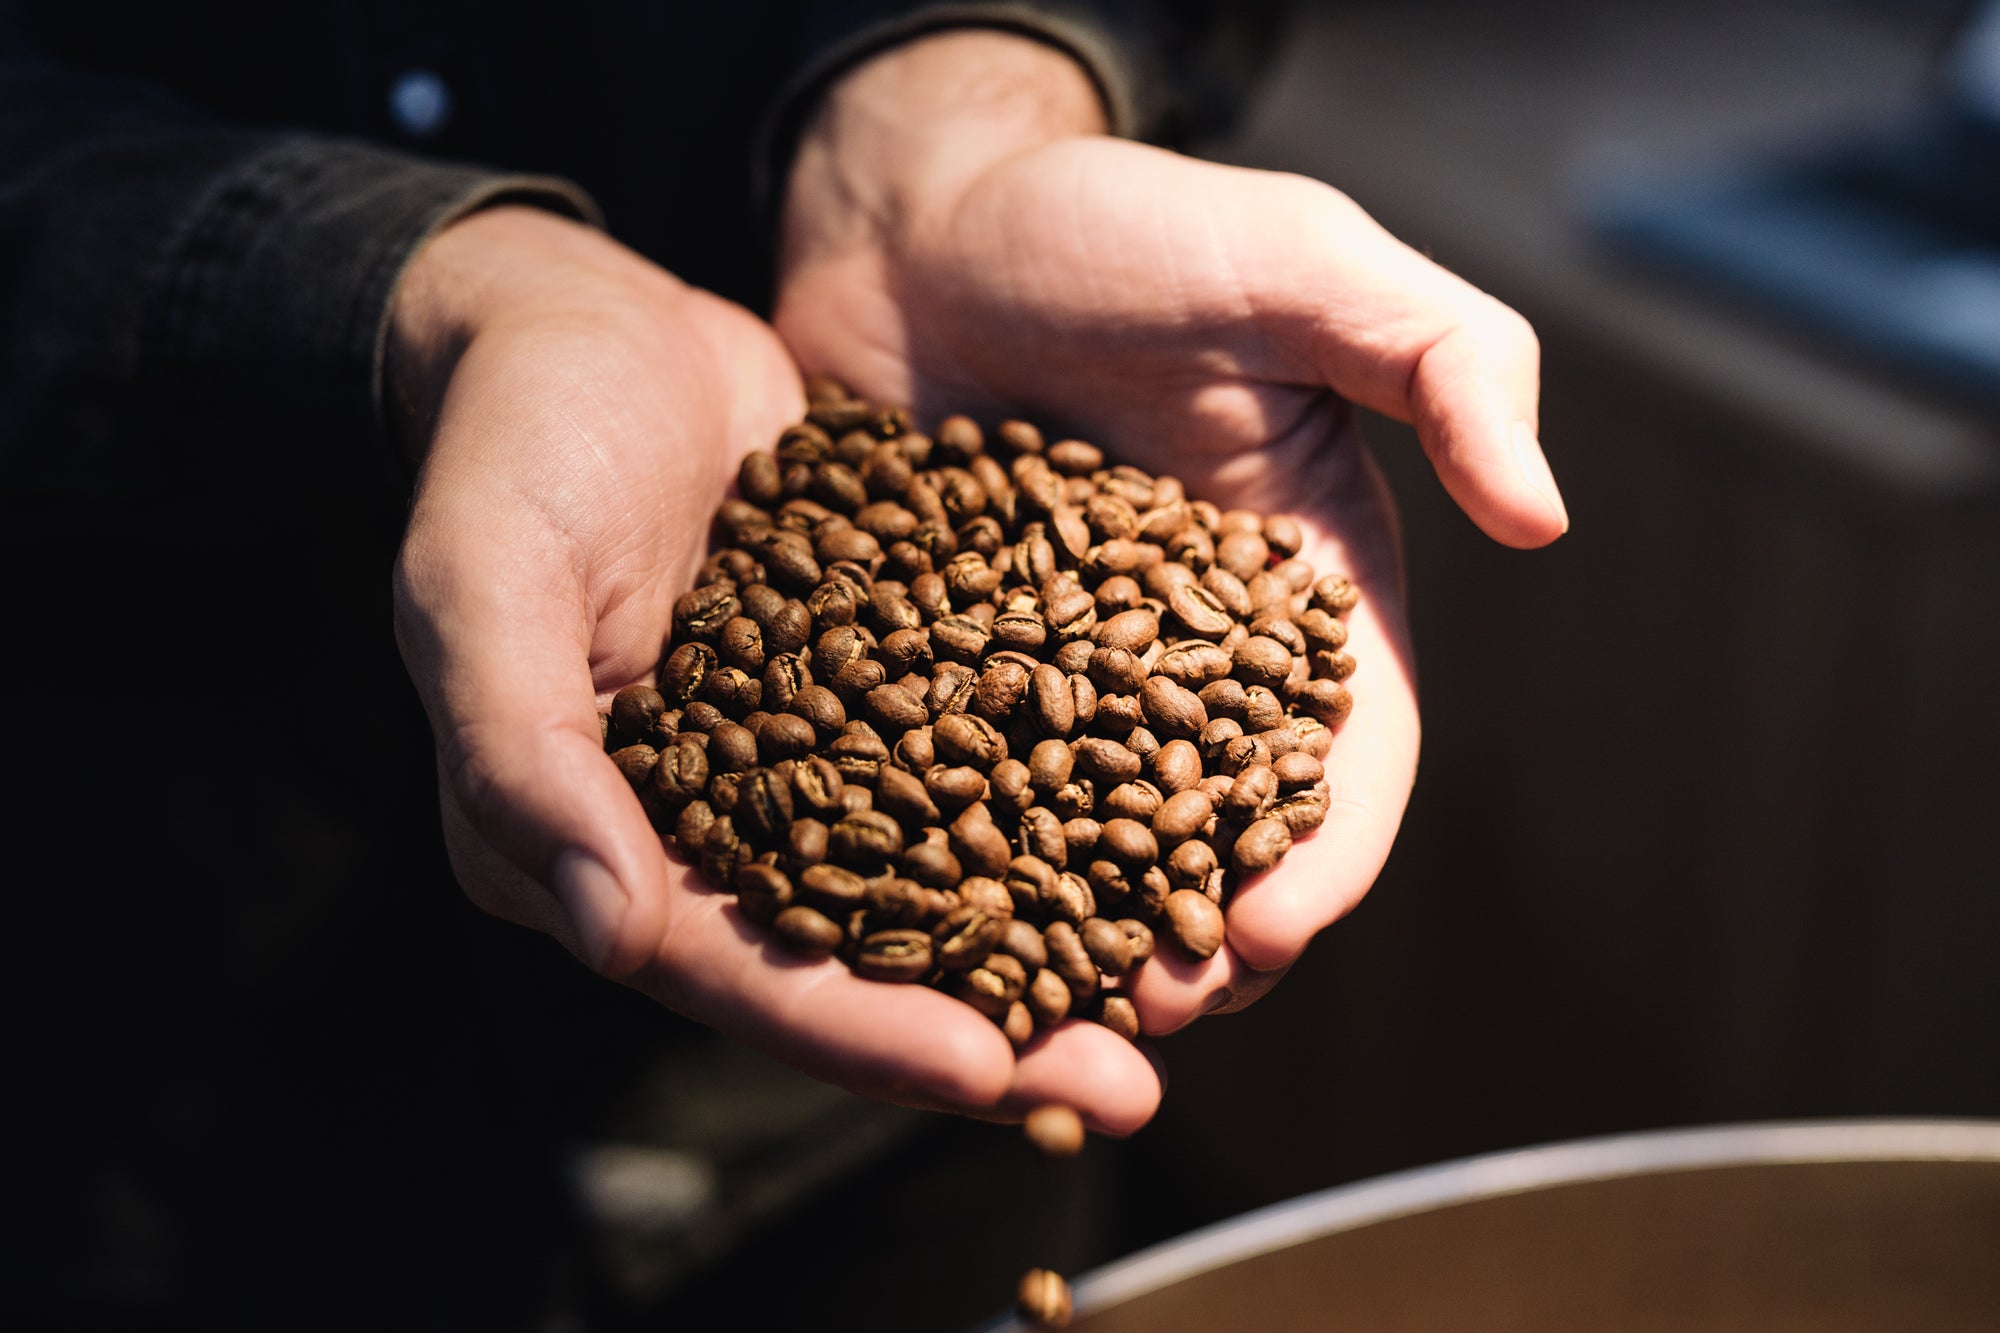 What is the main difference between specialty coffee and mainstream coffee?